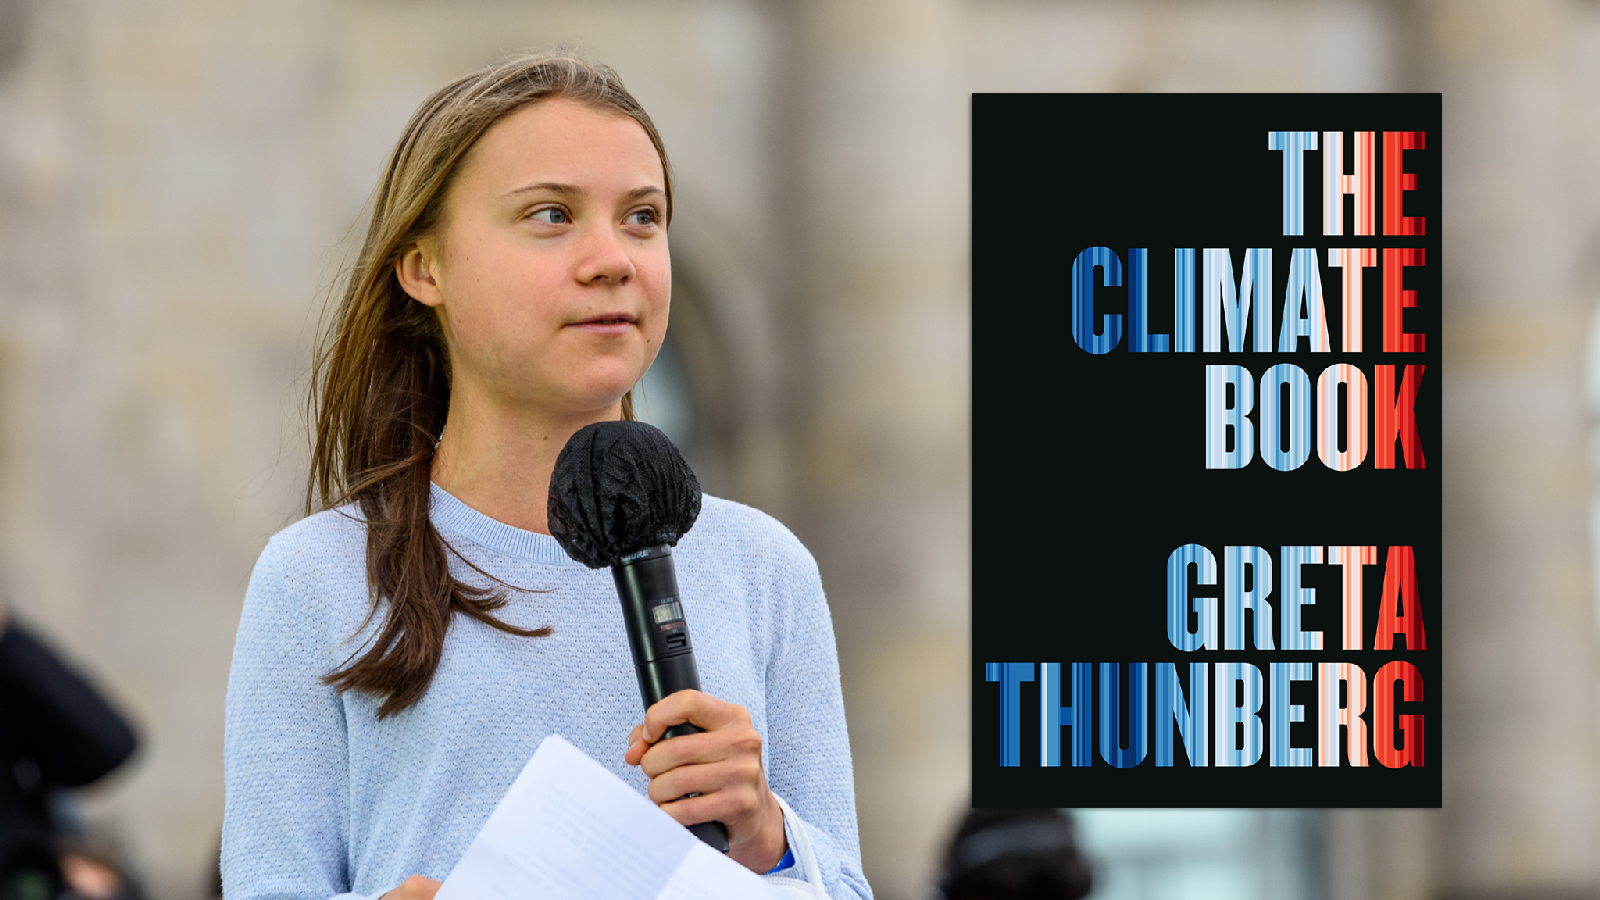 Book review: Greta Thunberg tells it like it is in “The Climate